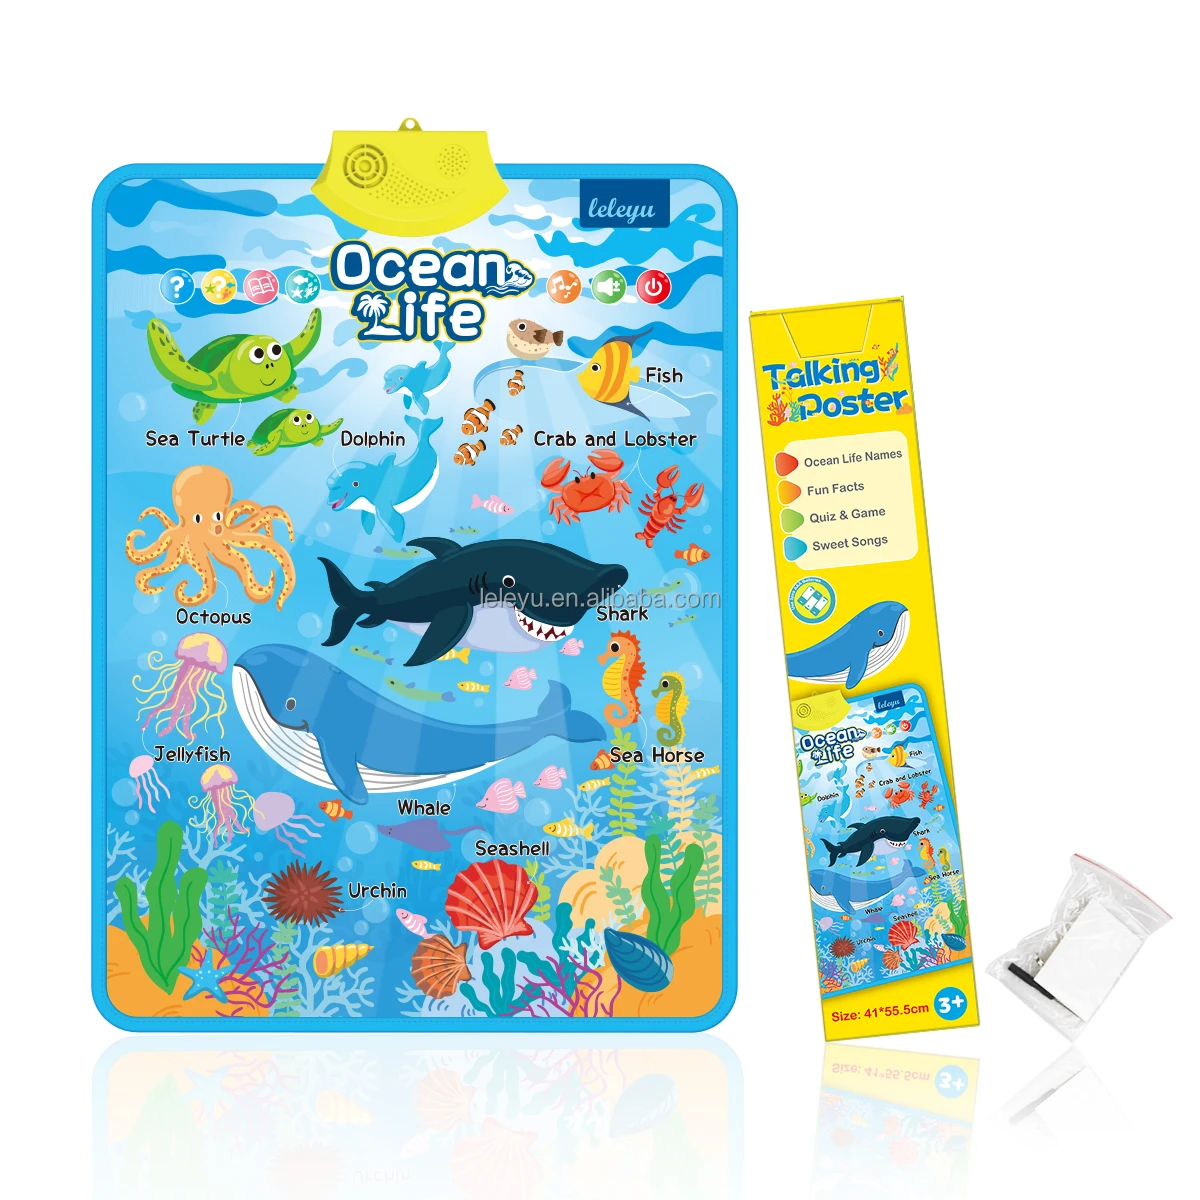 Ag06 Ocean Animals Talking Poster Marine Life Chart Fun Facts Of Each Animal  In The Sea Funny Game To Find Sea Animals Toy - Buy Ocean Animals Poster, Marine Life Chart,Talking Poster Product